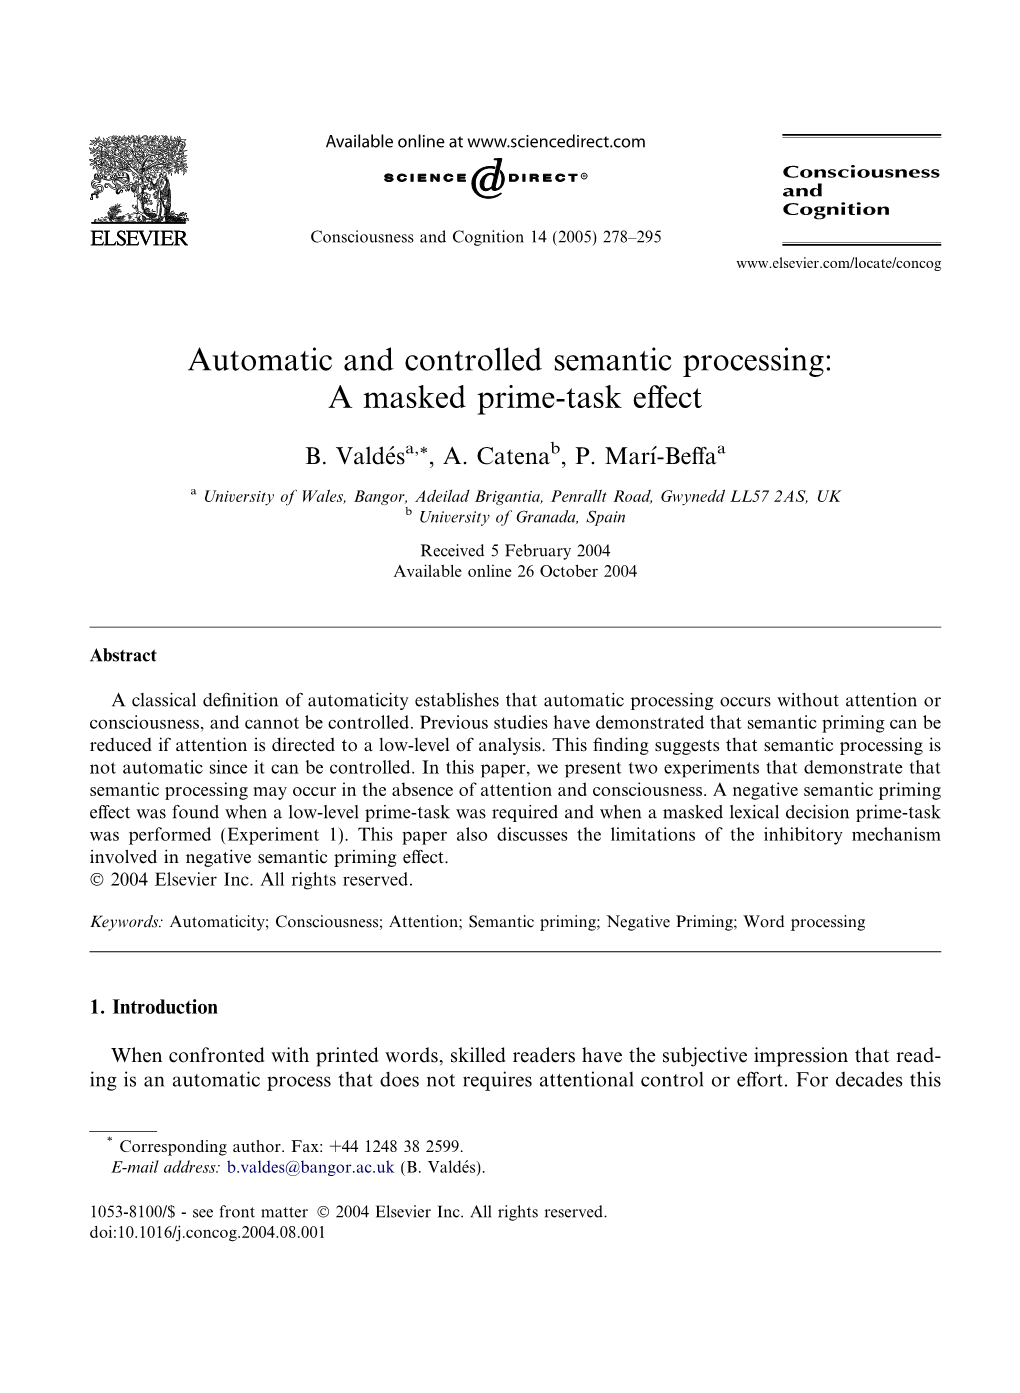 Automatic and Controlled Semantic Processing: a Masked Prime-Task Eﬀect